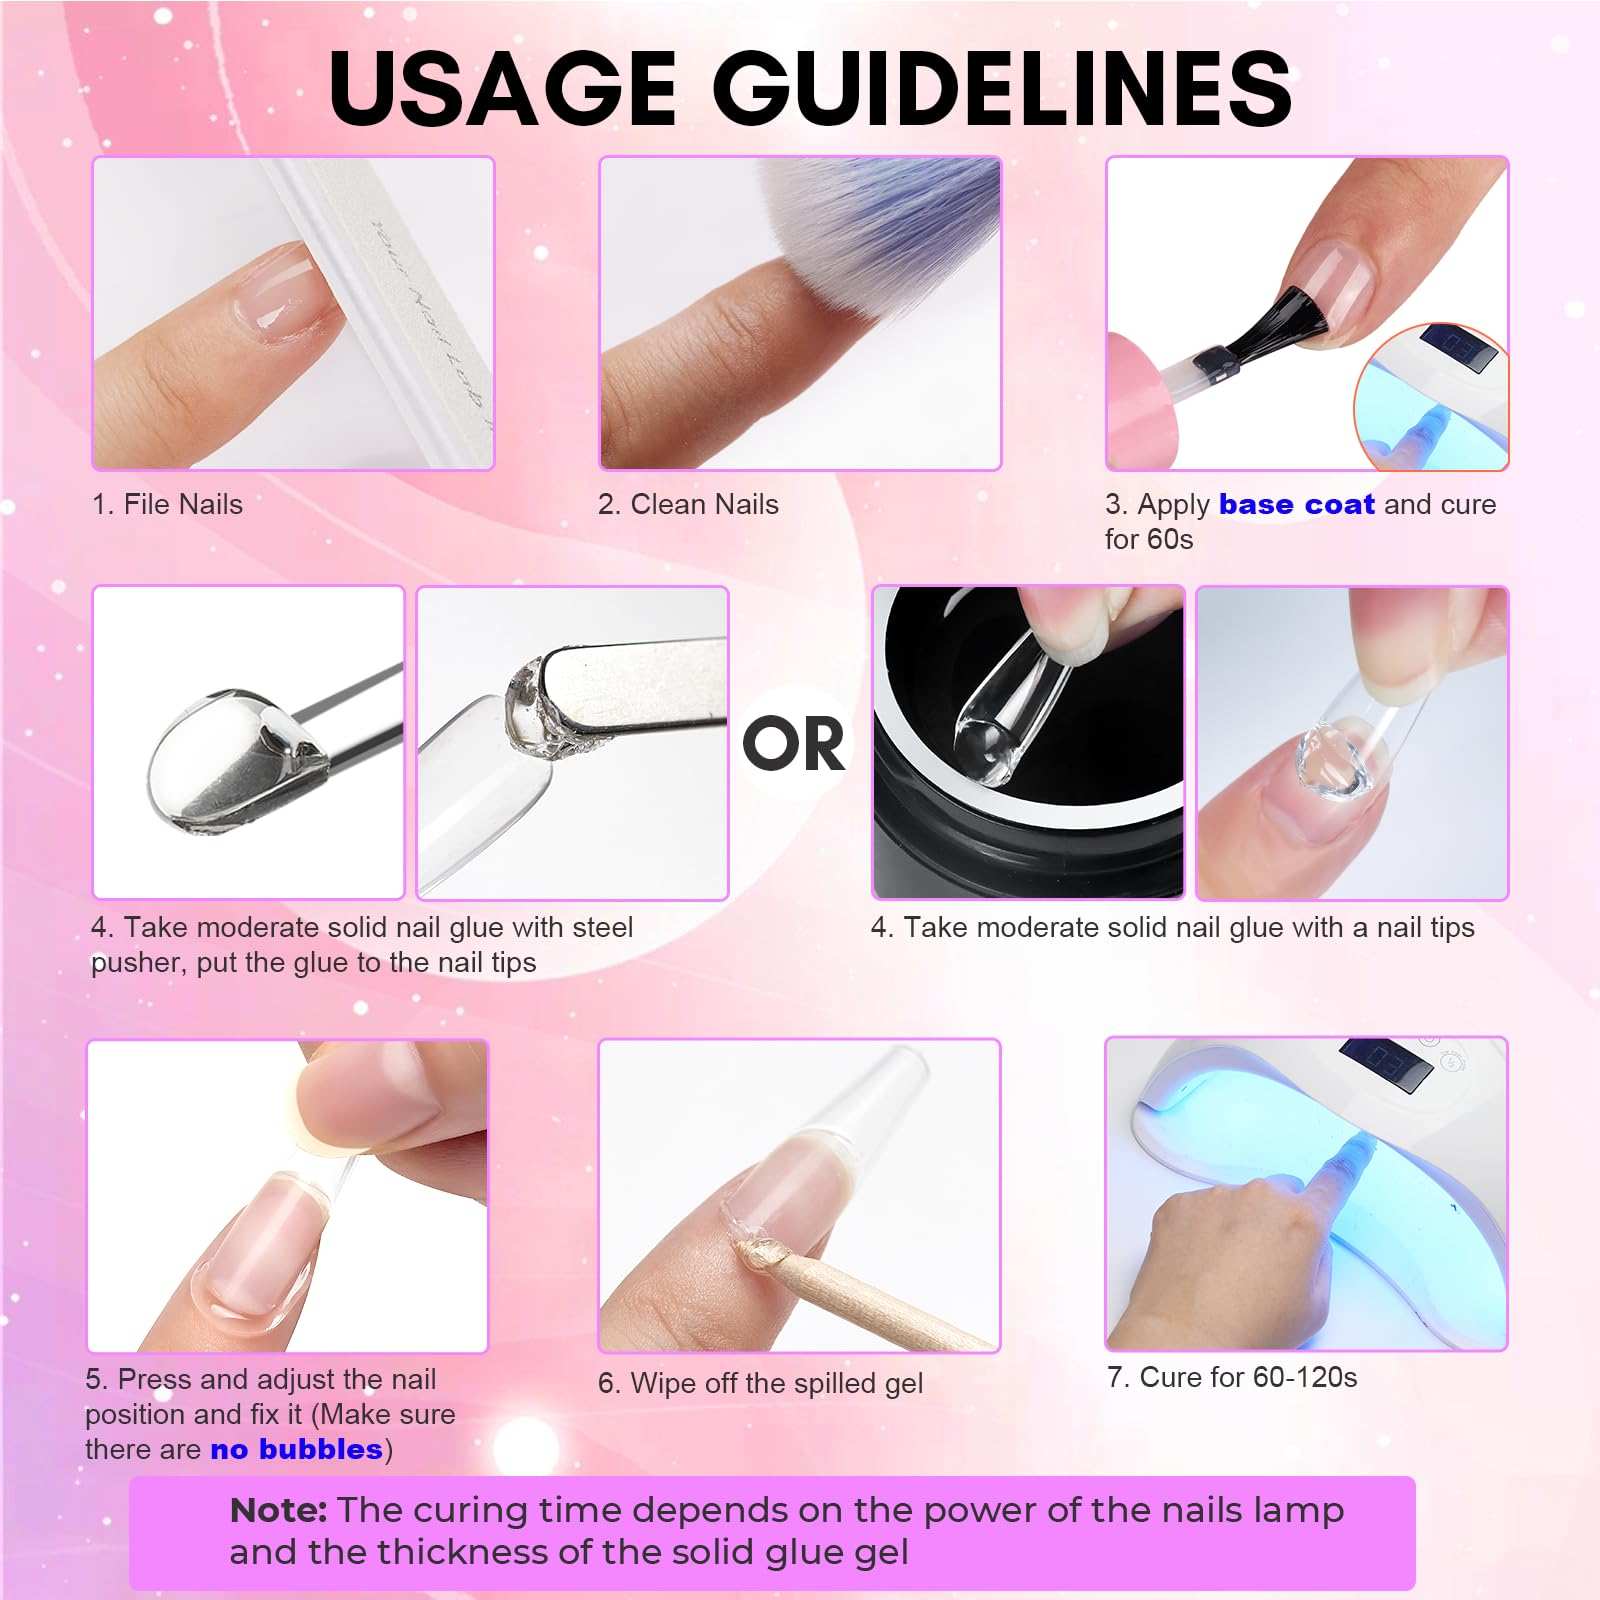 Upgrade Solid Nail Gel Glue for Soft Gel Nail Tips - Clear 15g